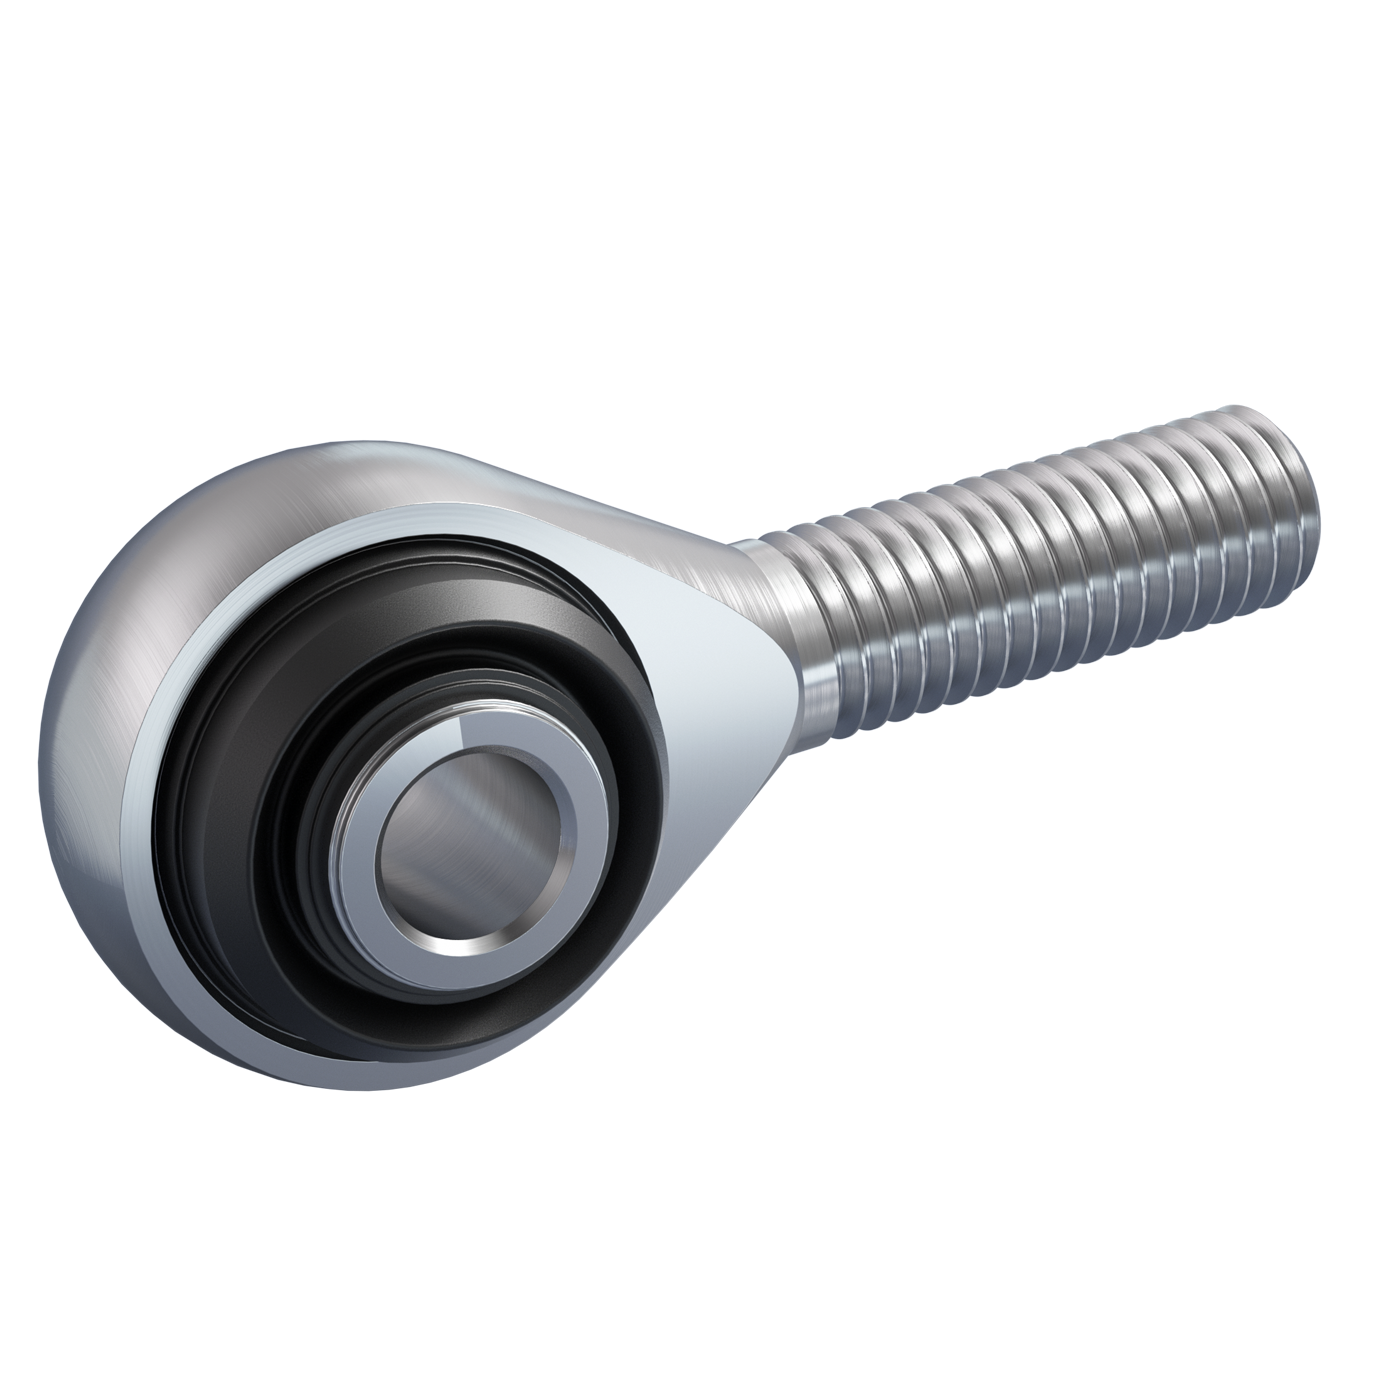 Rod ends DIN ISO 12240-4 (DIN 648) K series high performance version stainless steel with sealing male thread